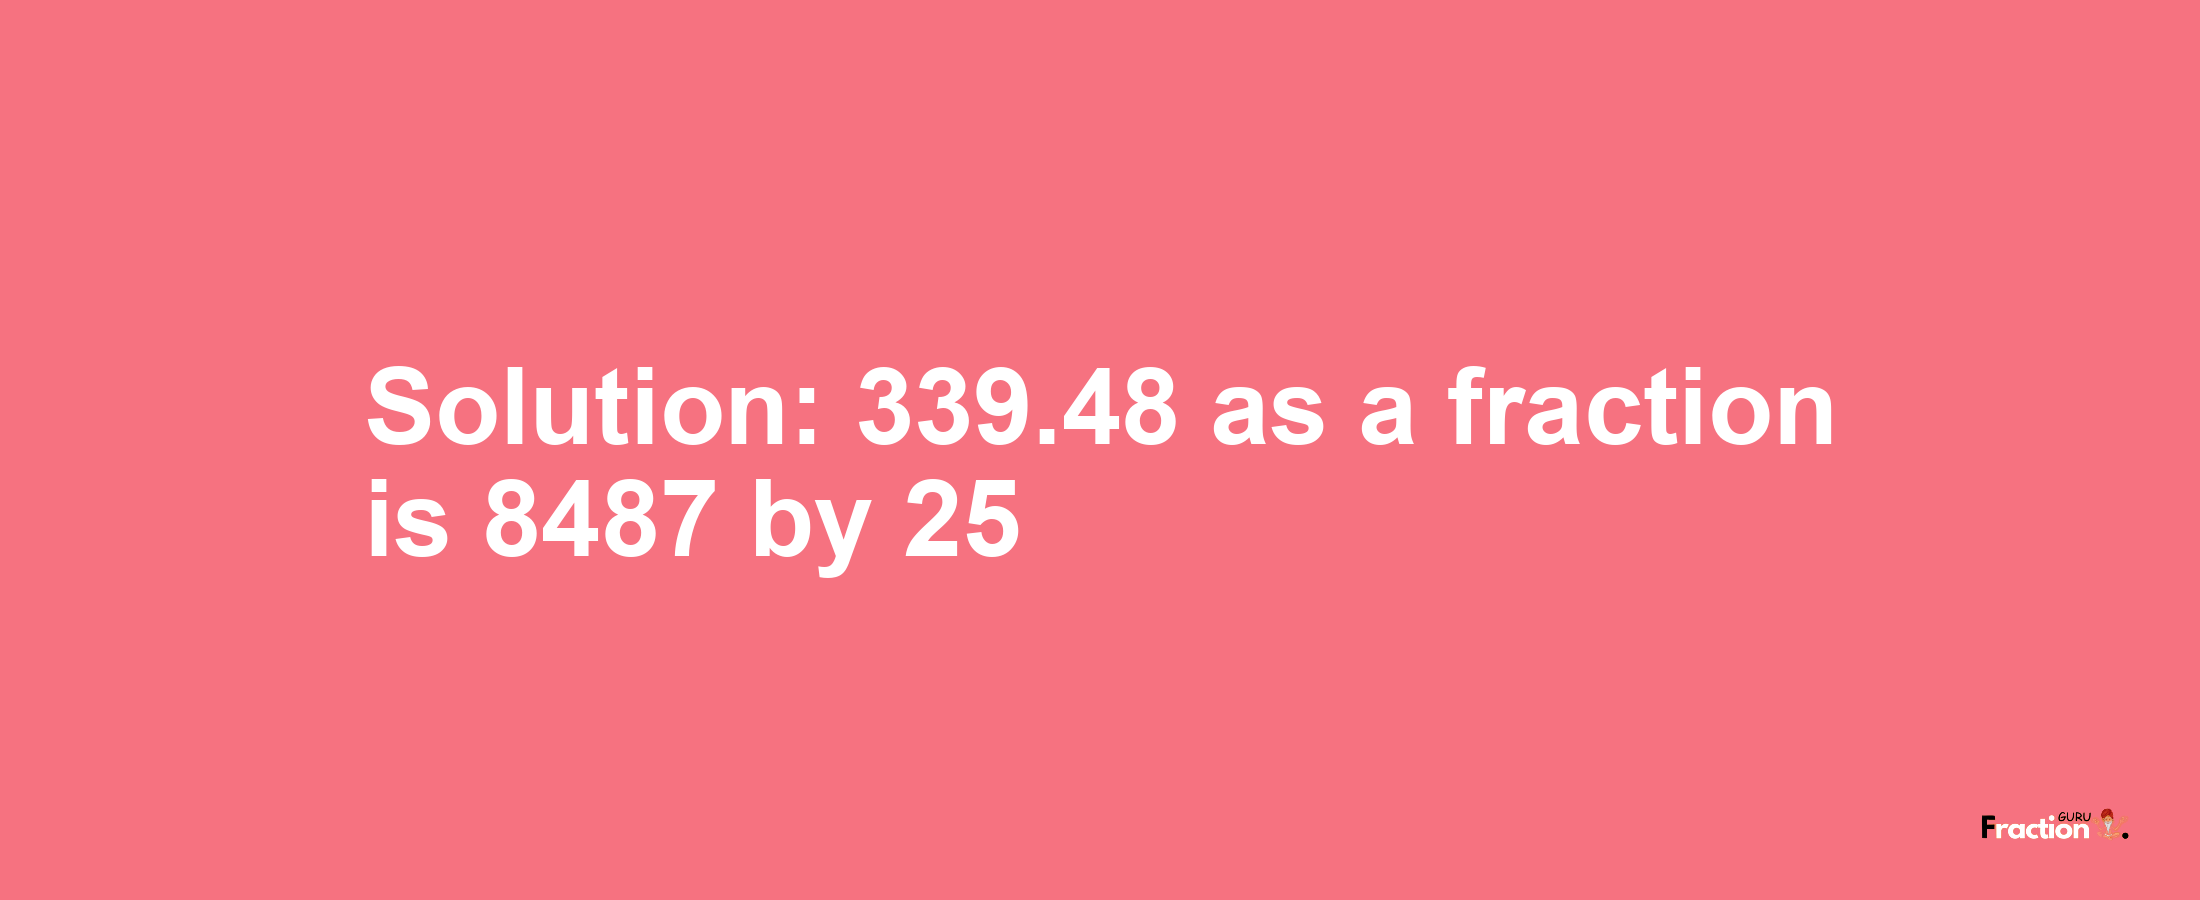 Solution:339.48 as a fraction is 8487/25